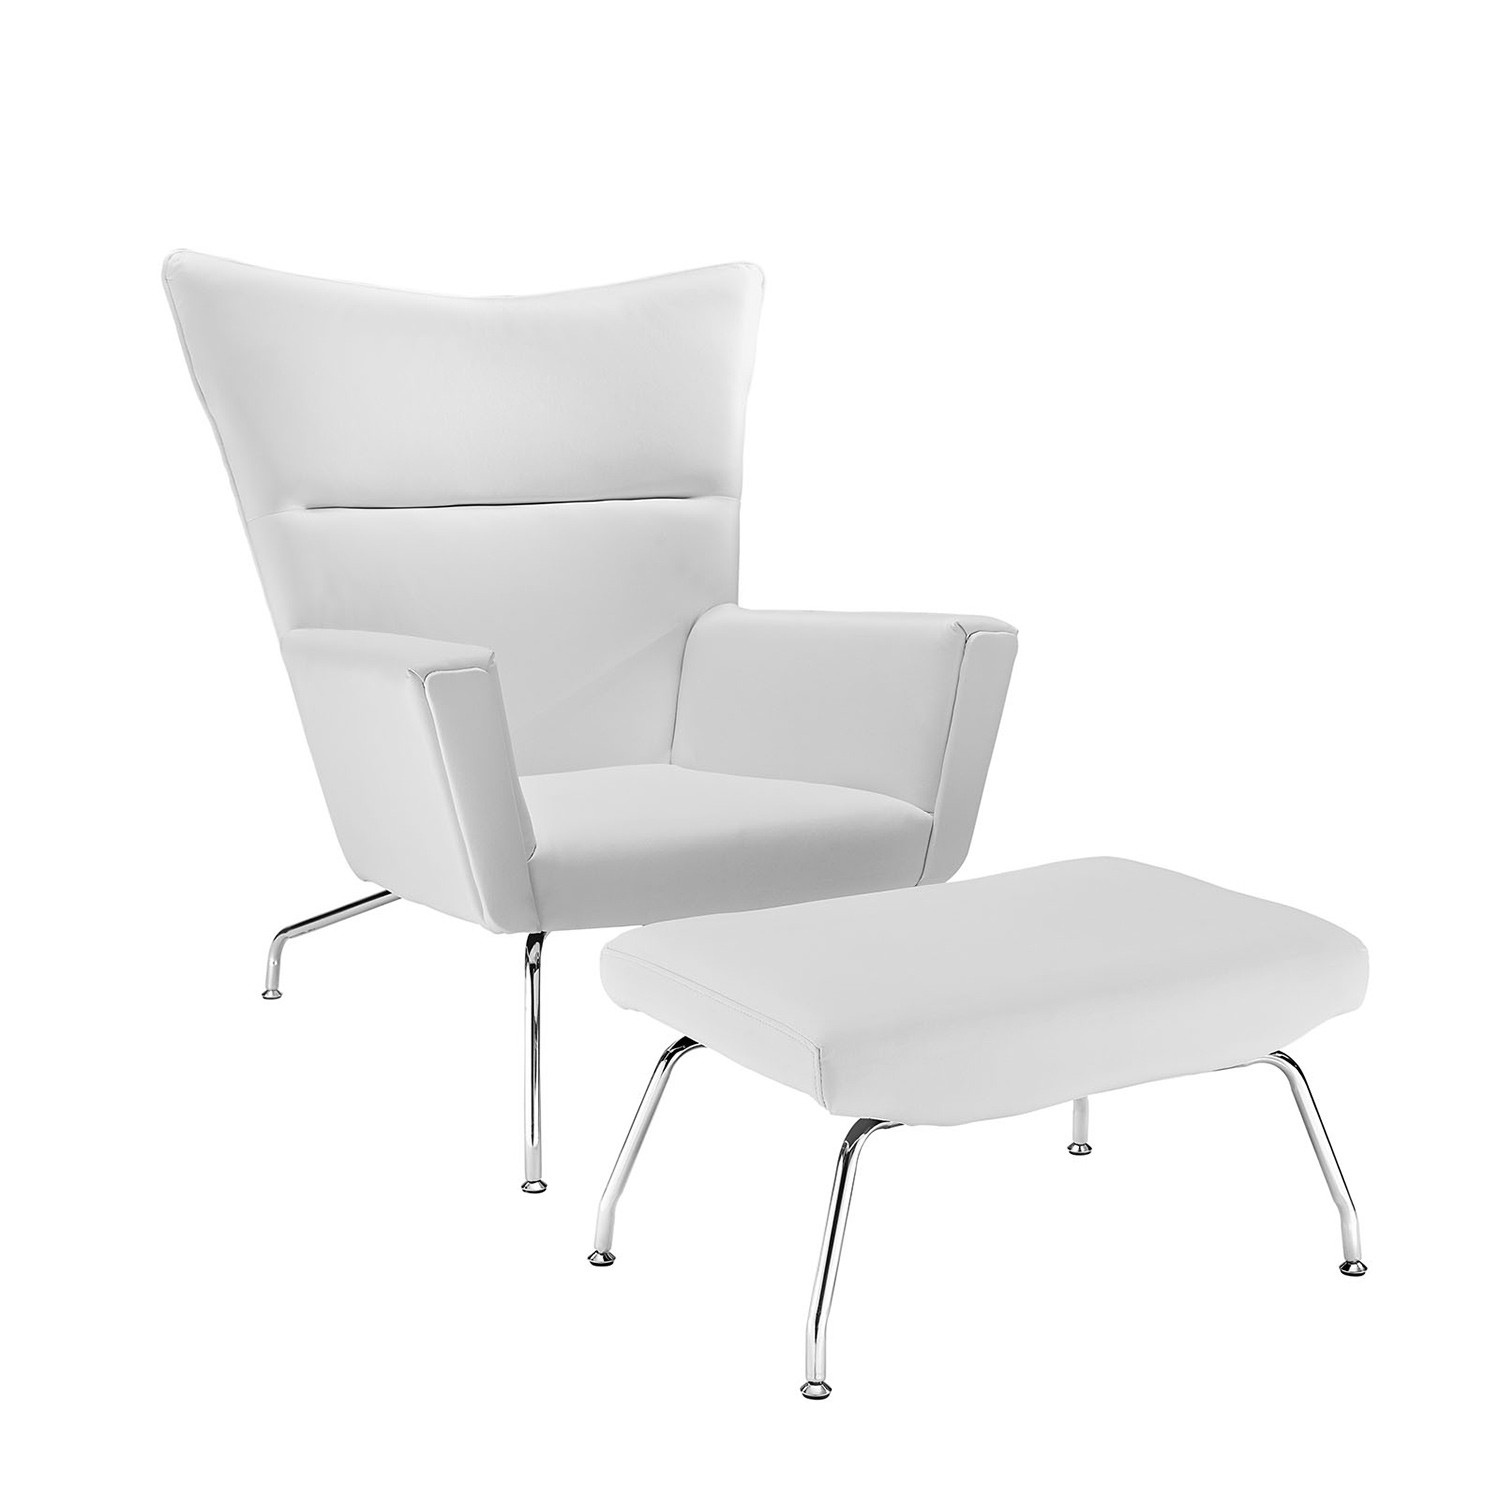 Modway Class Leather Lounge Chair - White